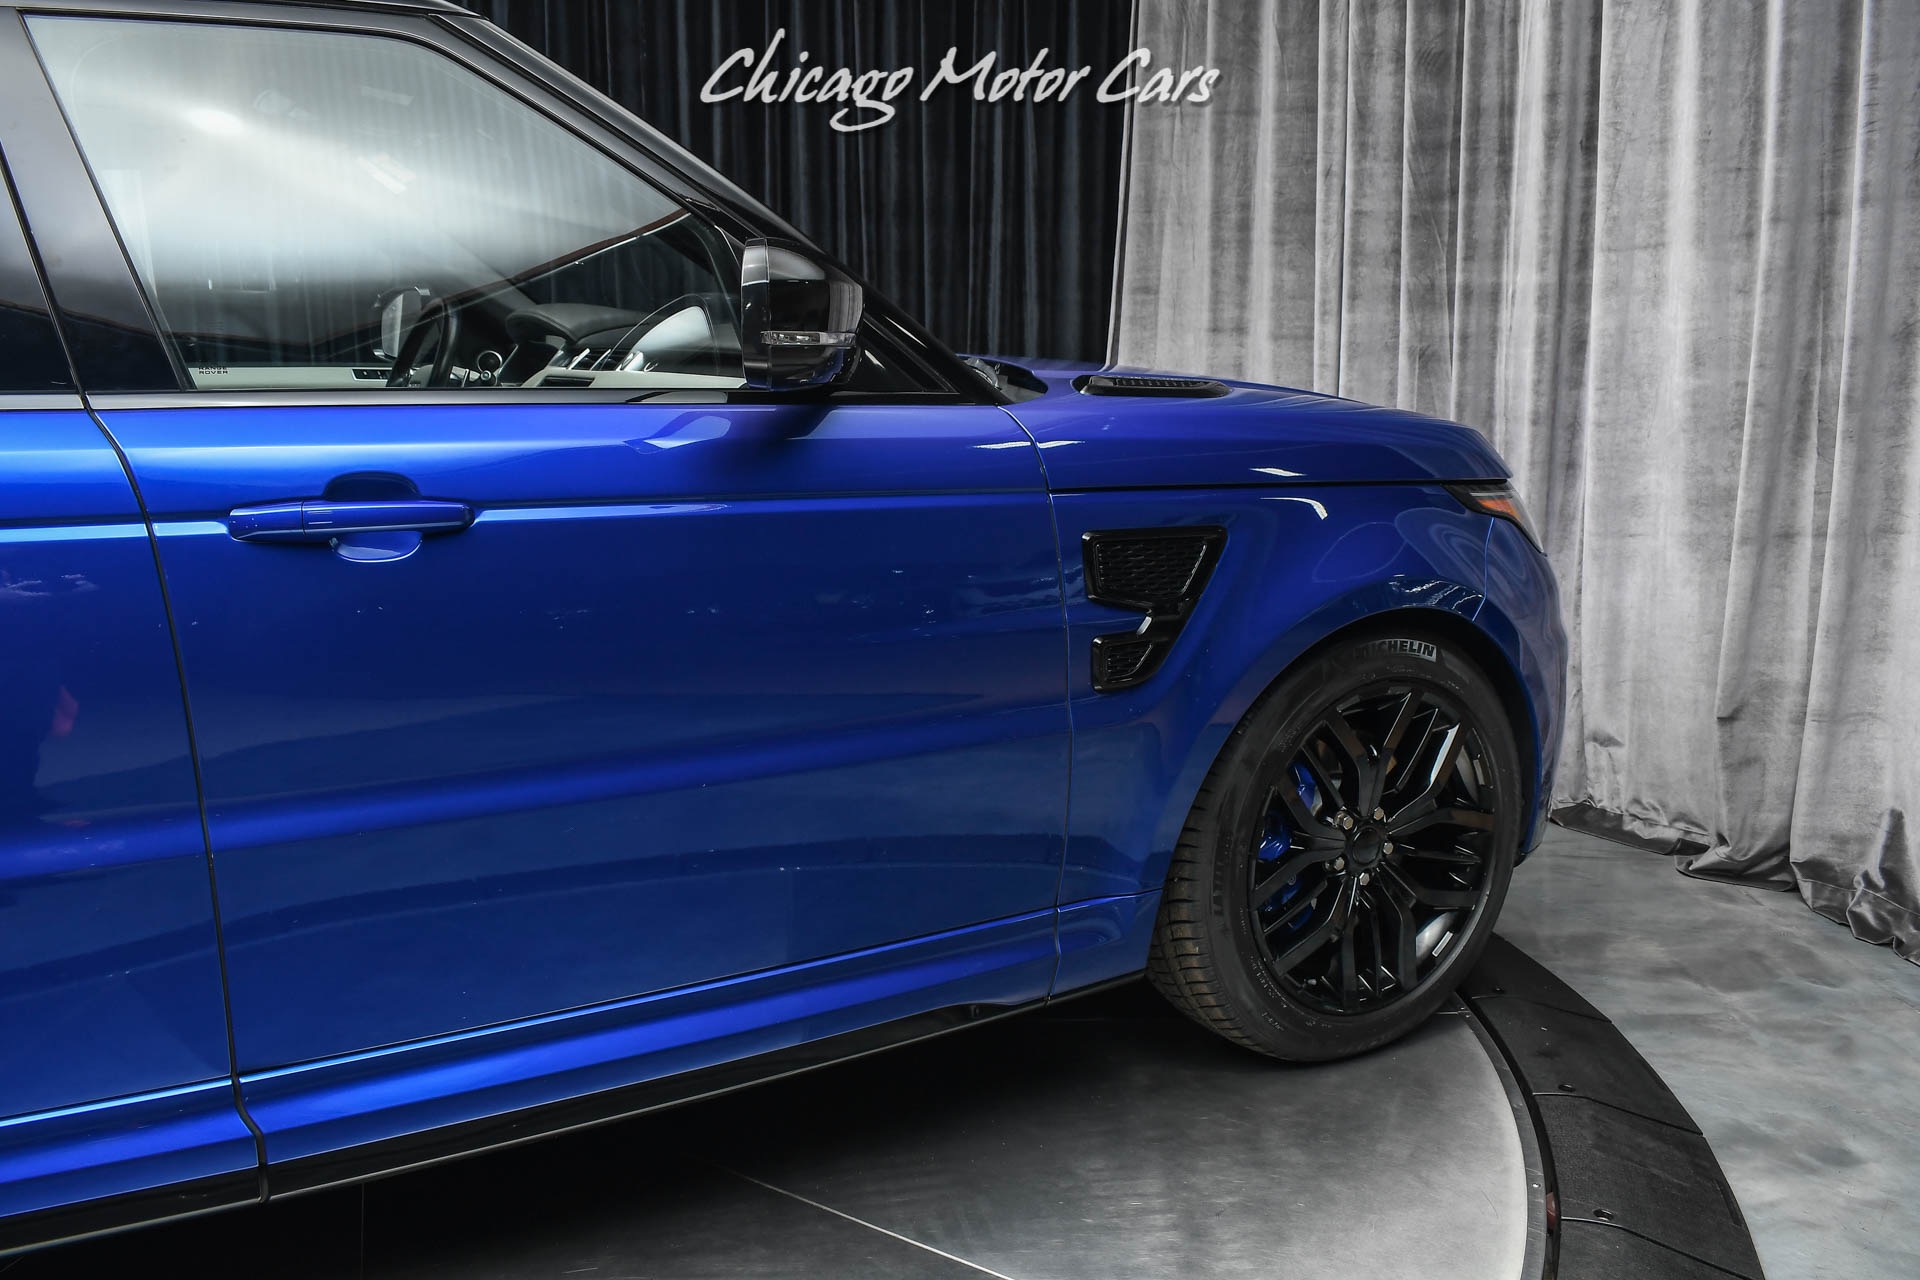 Used-2015-Land-Rover-Range-Rover-Sport-SVR-Loaded-with-Carbon-Fiber-Rare-Color-Combo-Adaptive-Cruise-Control